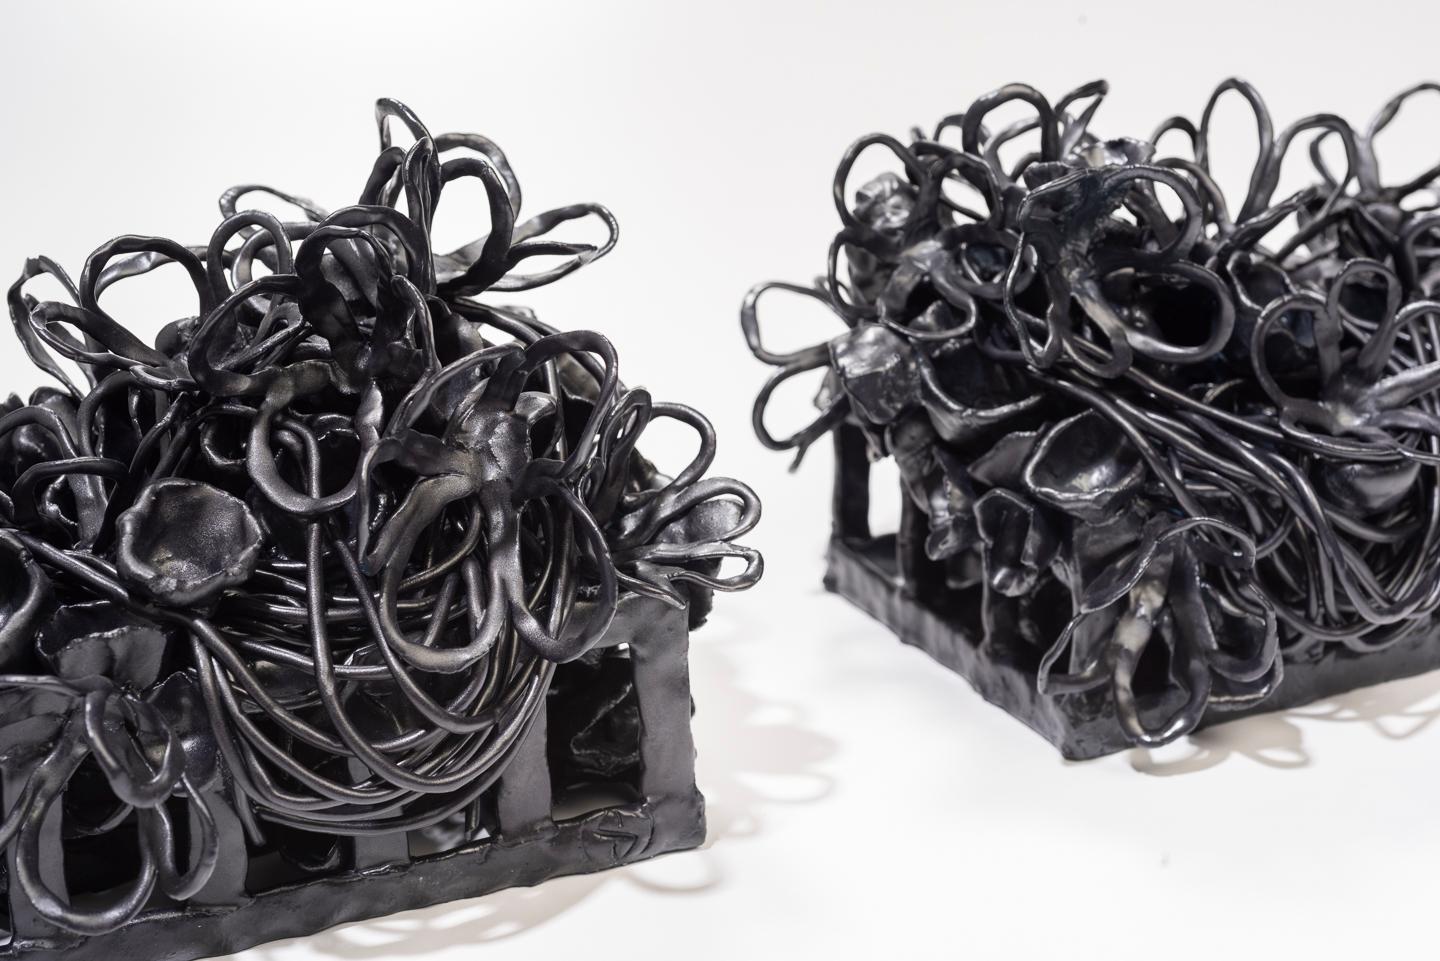 American Joanna Poag Binding Time(Black Grid w/ Flowers and Pods) Ceramic Sculpture, 2019 For Sale